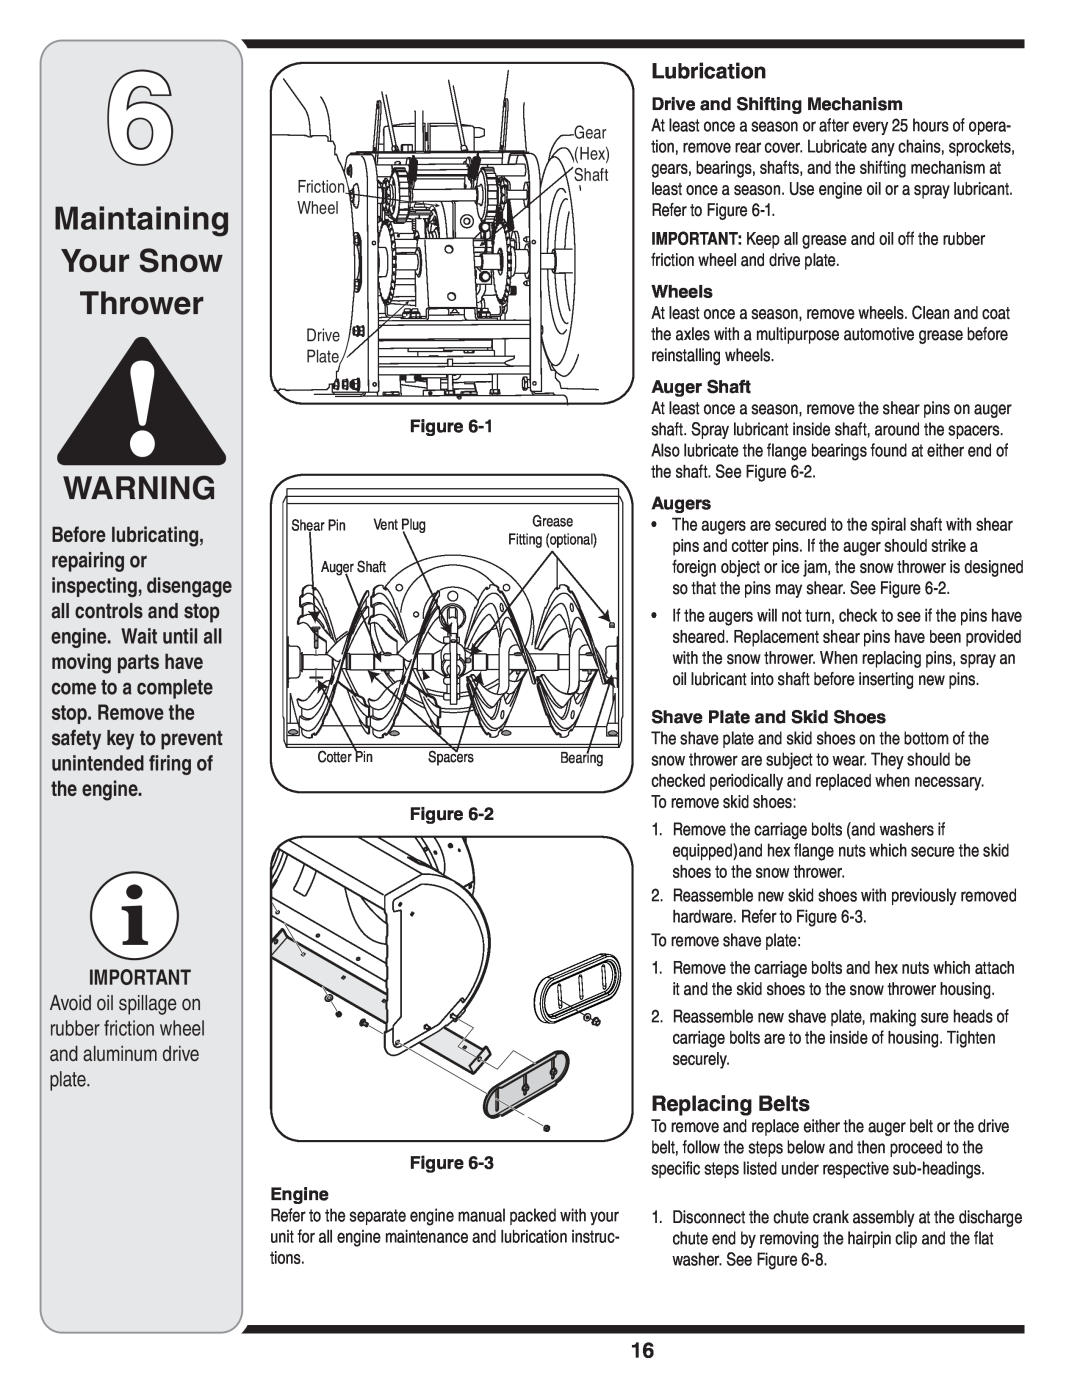 MTD 769-04179 Maintaining Your Snow Thrower, Lubrication, Replacing Belts, Drive and Shifting Mechanism, Engine, Wheels 